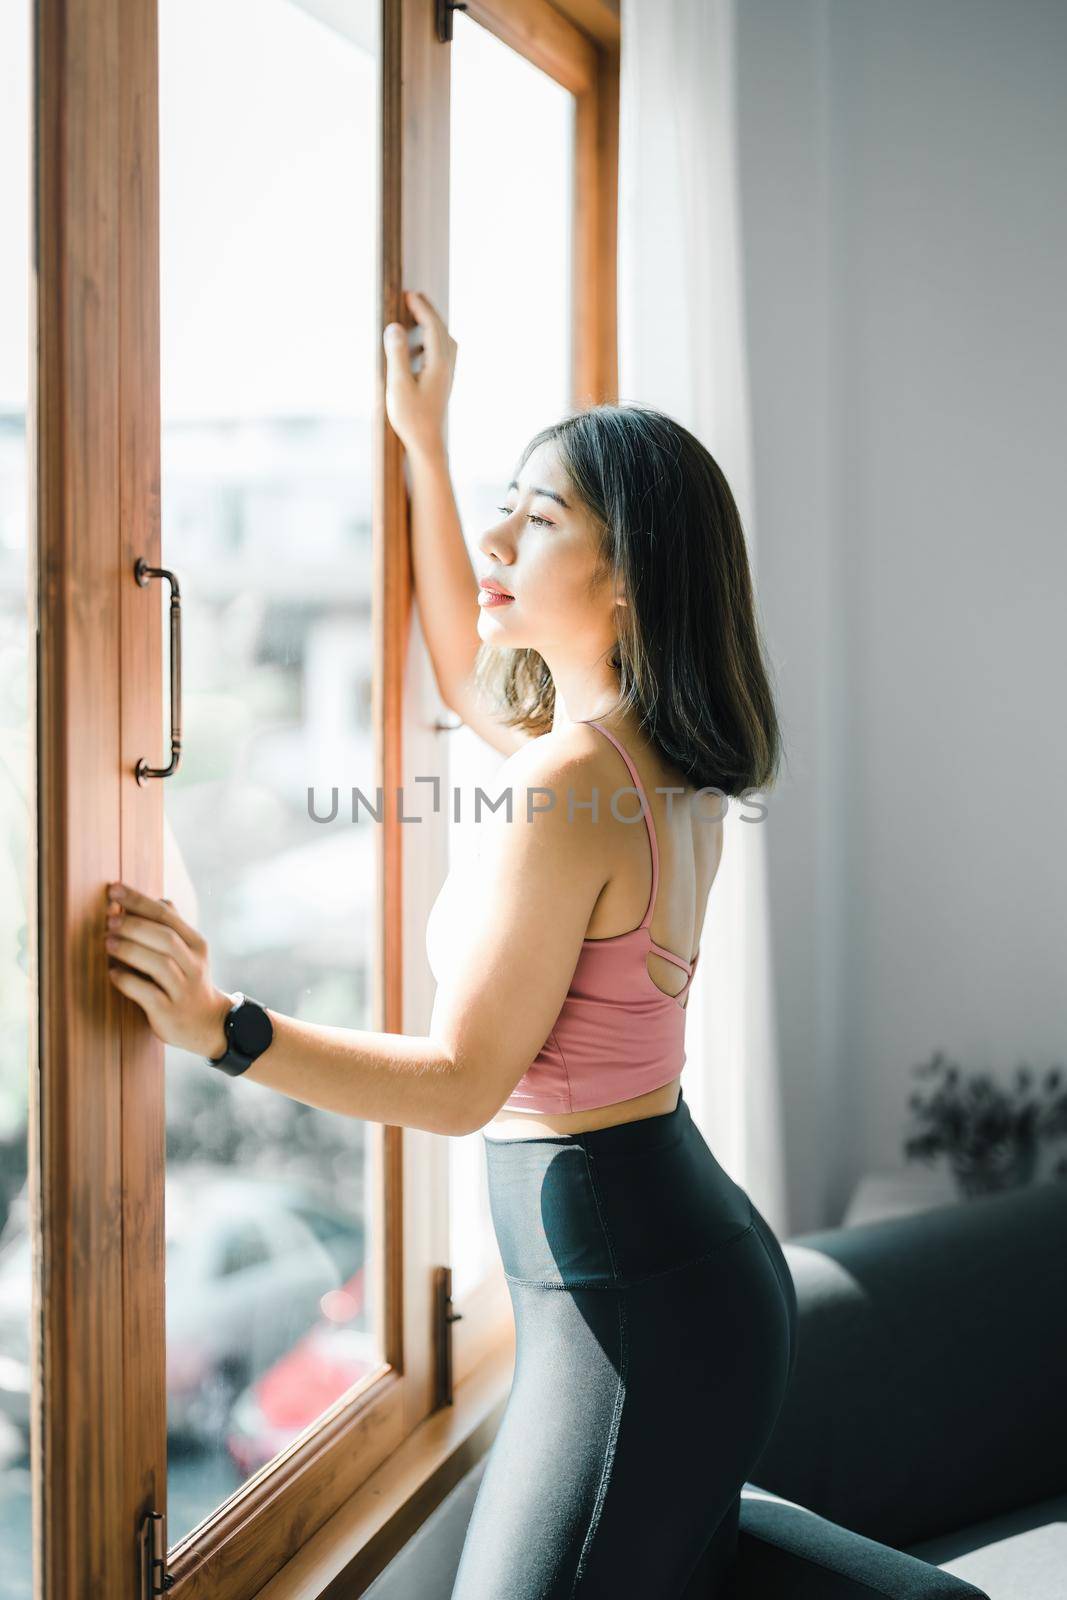 stress relief, muscle relaxation, breathing exercises, exercise, meditation, portrait of Young Asian woman relaxing her body from office work by practicing yoga by watching online tutorials. by Manastrong